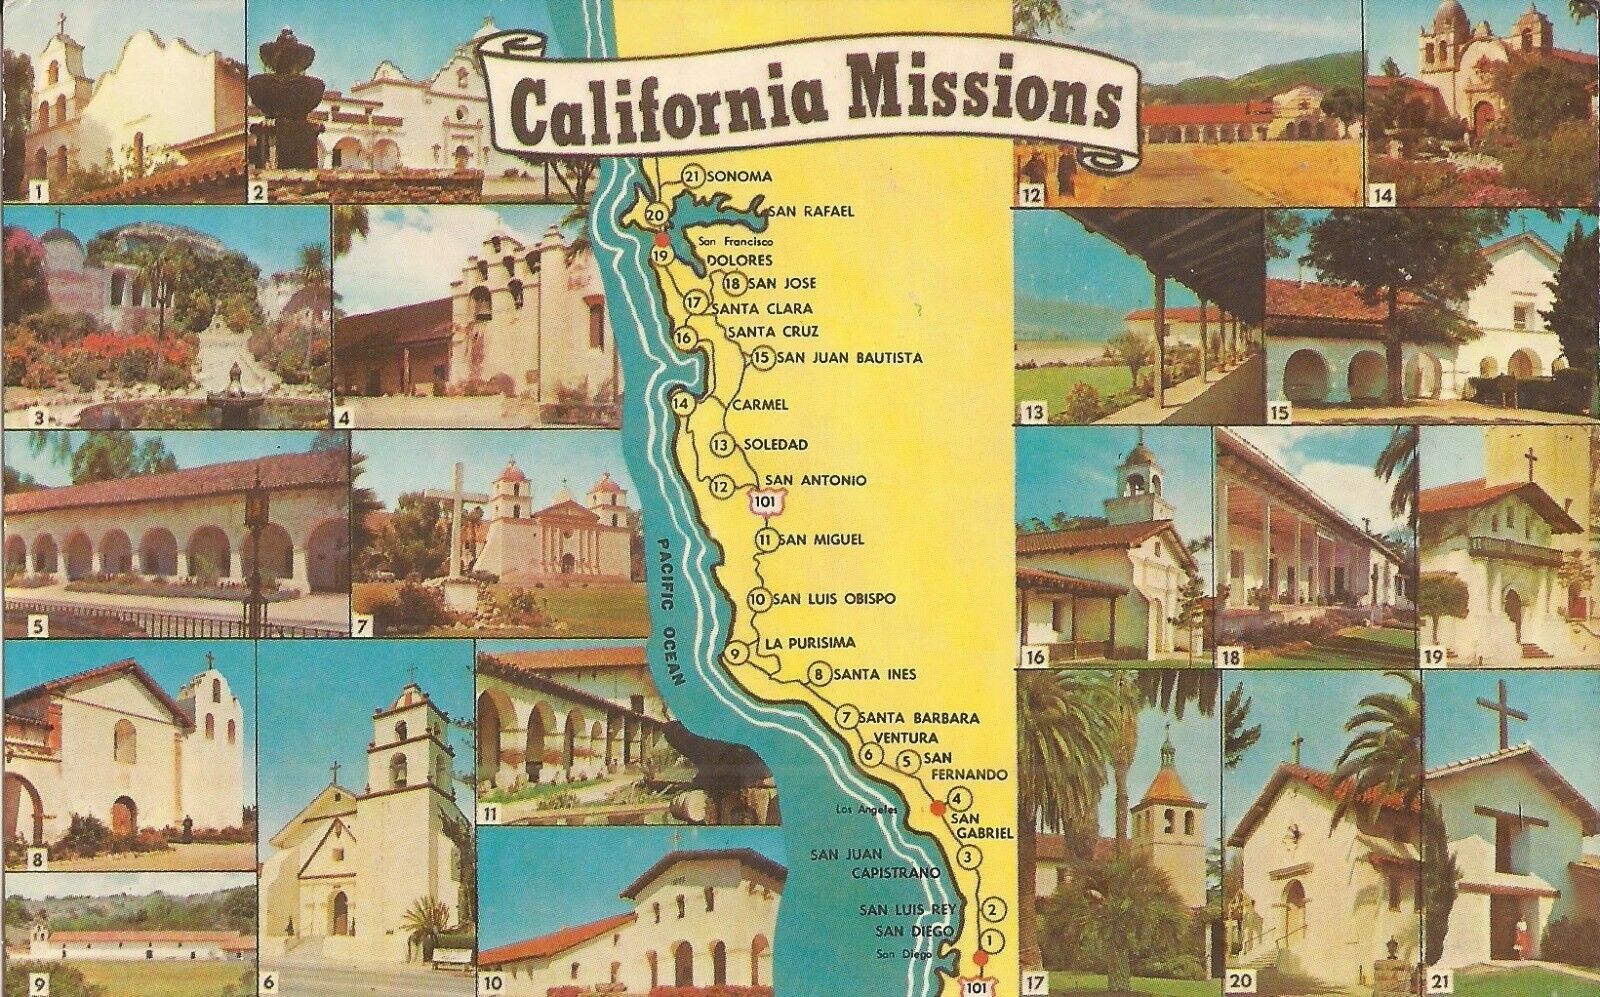 California Missions MAP & MULTIVIEW - 21 Mission Images